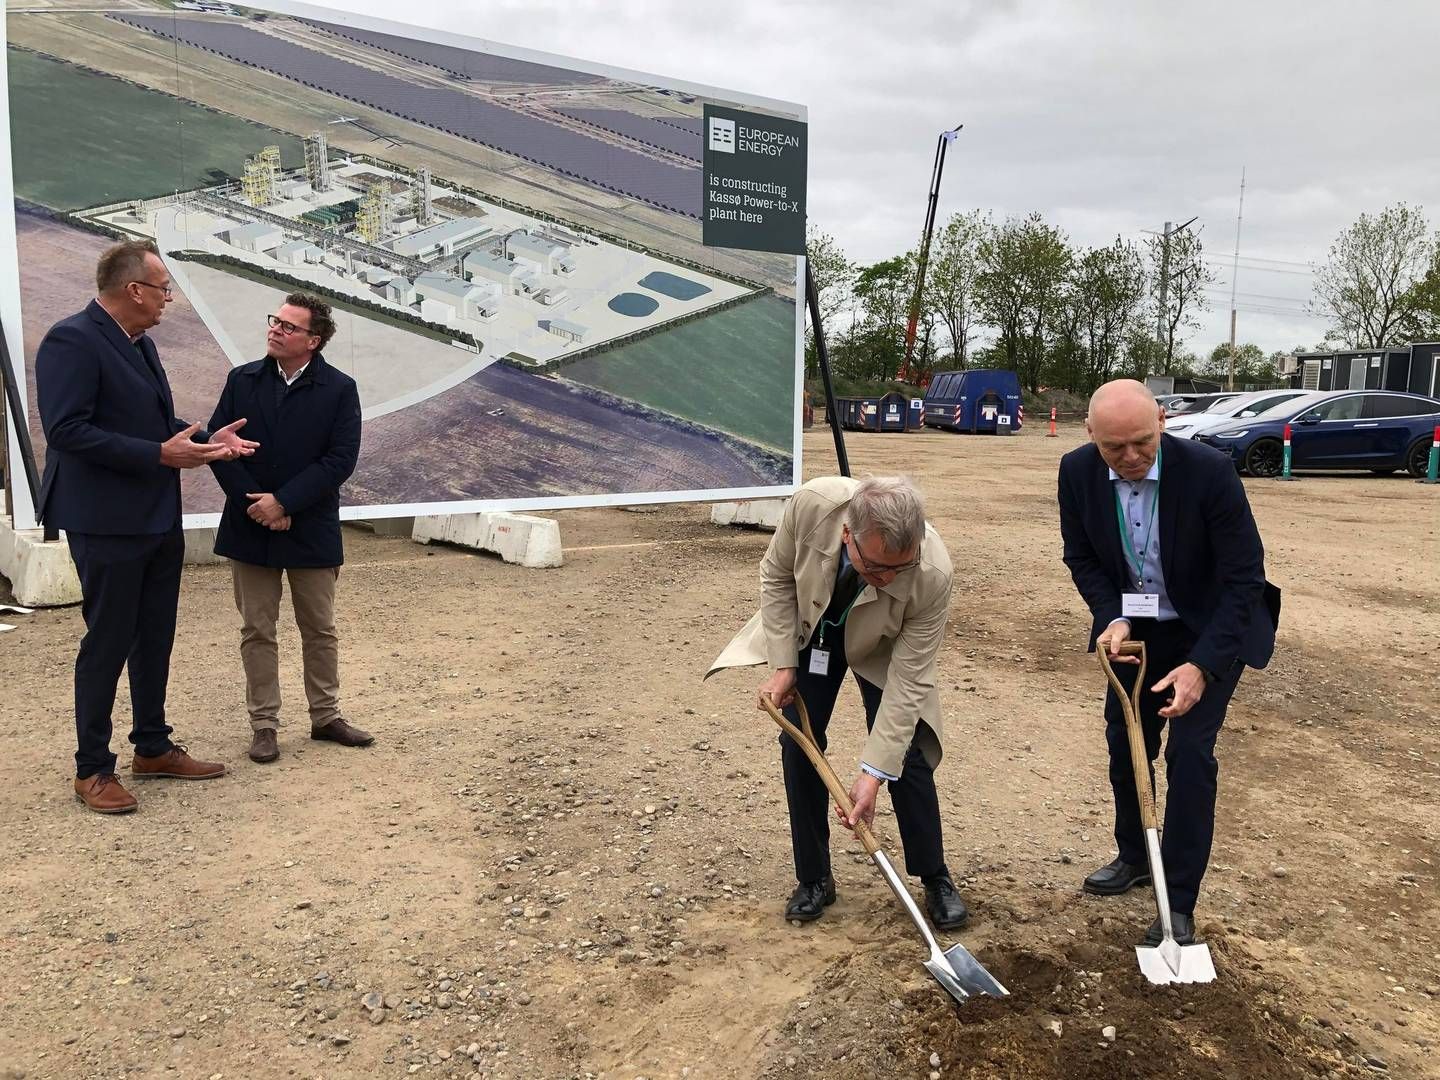 Construction of Danish PtX plant Kassø was initiated last May. Perhaps it would have gone a little faster if everyone present had grabbed a shovel and helped out. | Photo: European Energy